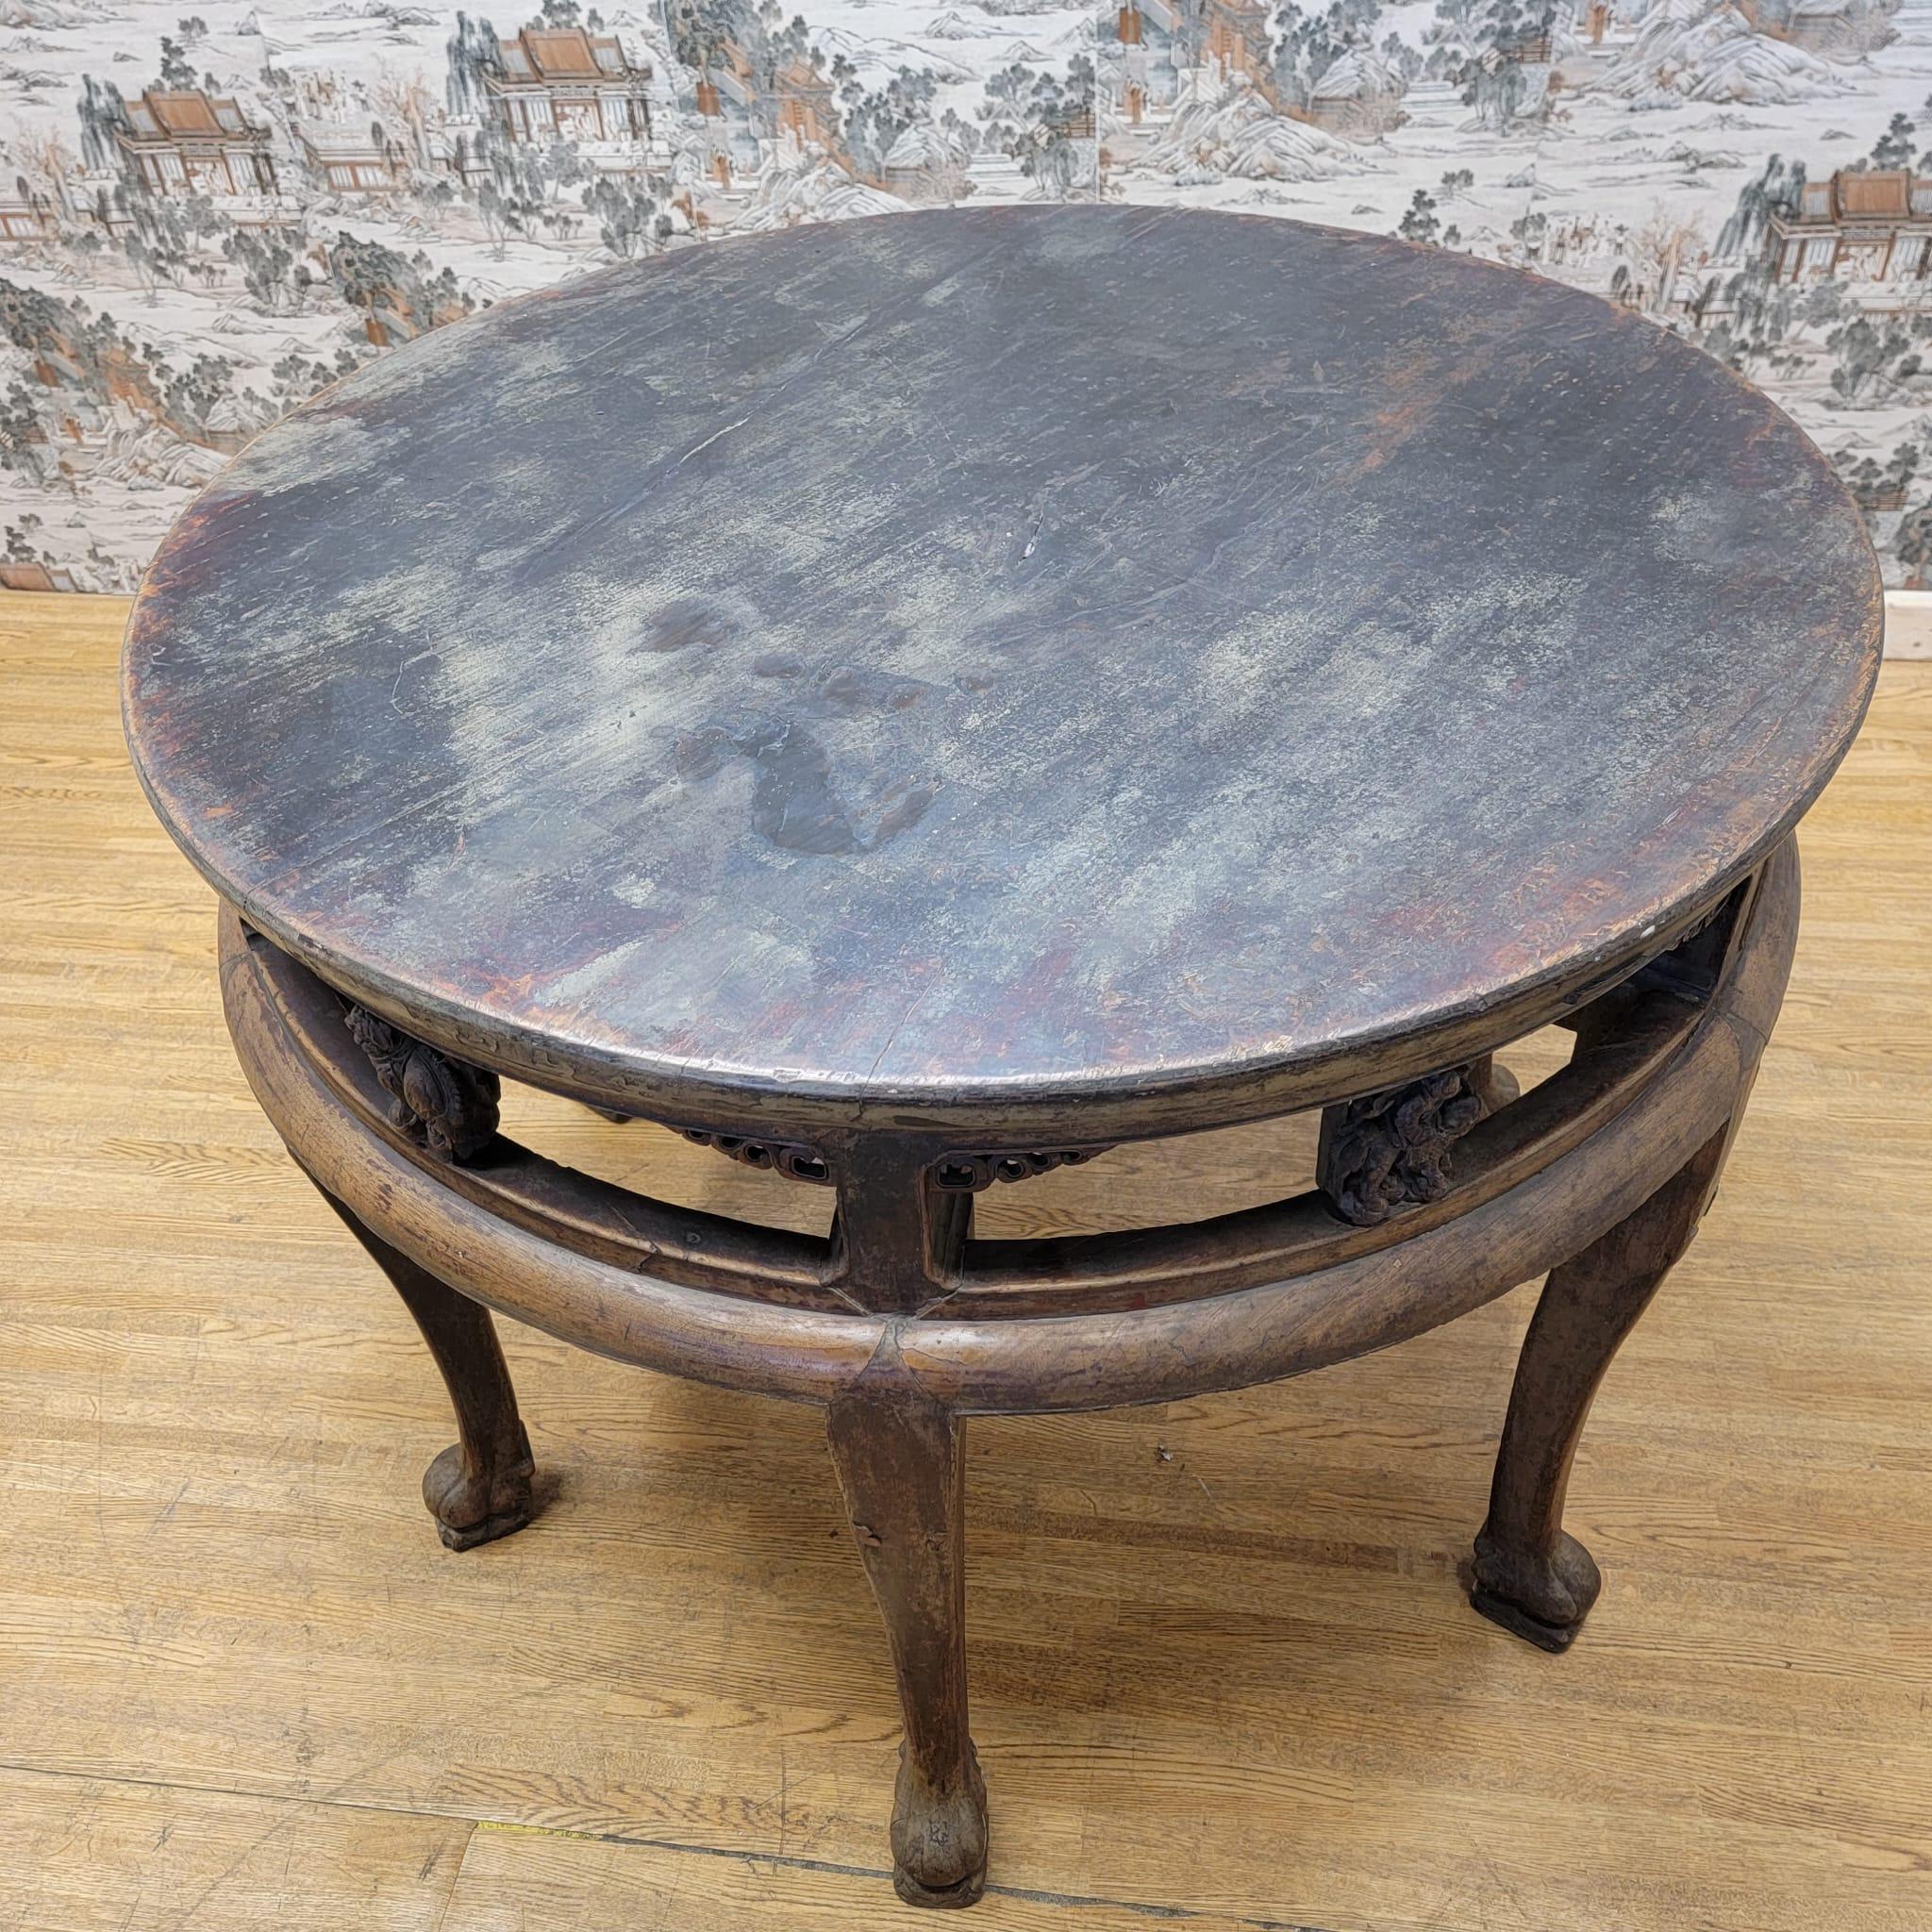 Early 20th Century Antique Shanxi Province Tall Elm Round Accent Table with Animal Carvings For Sale